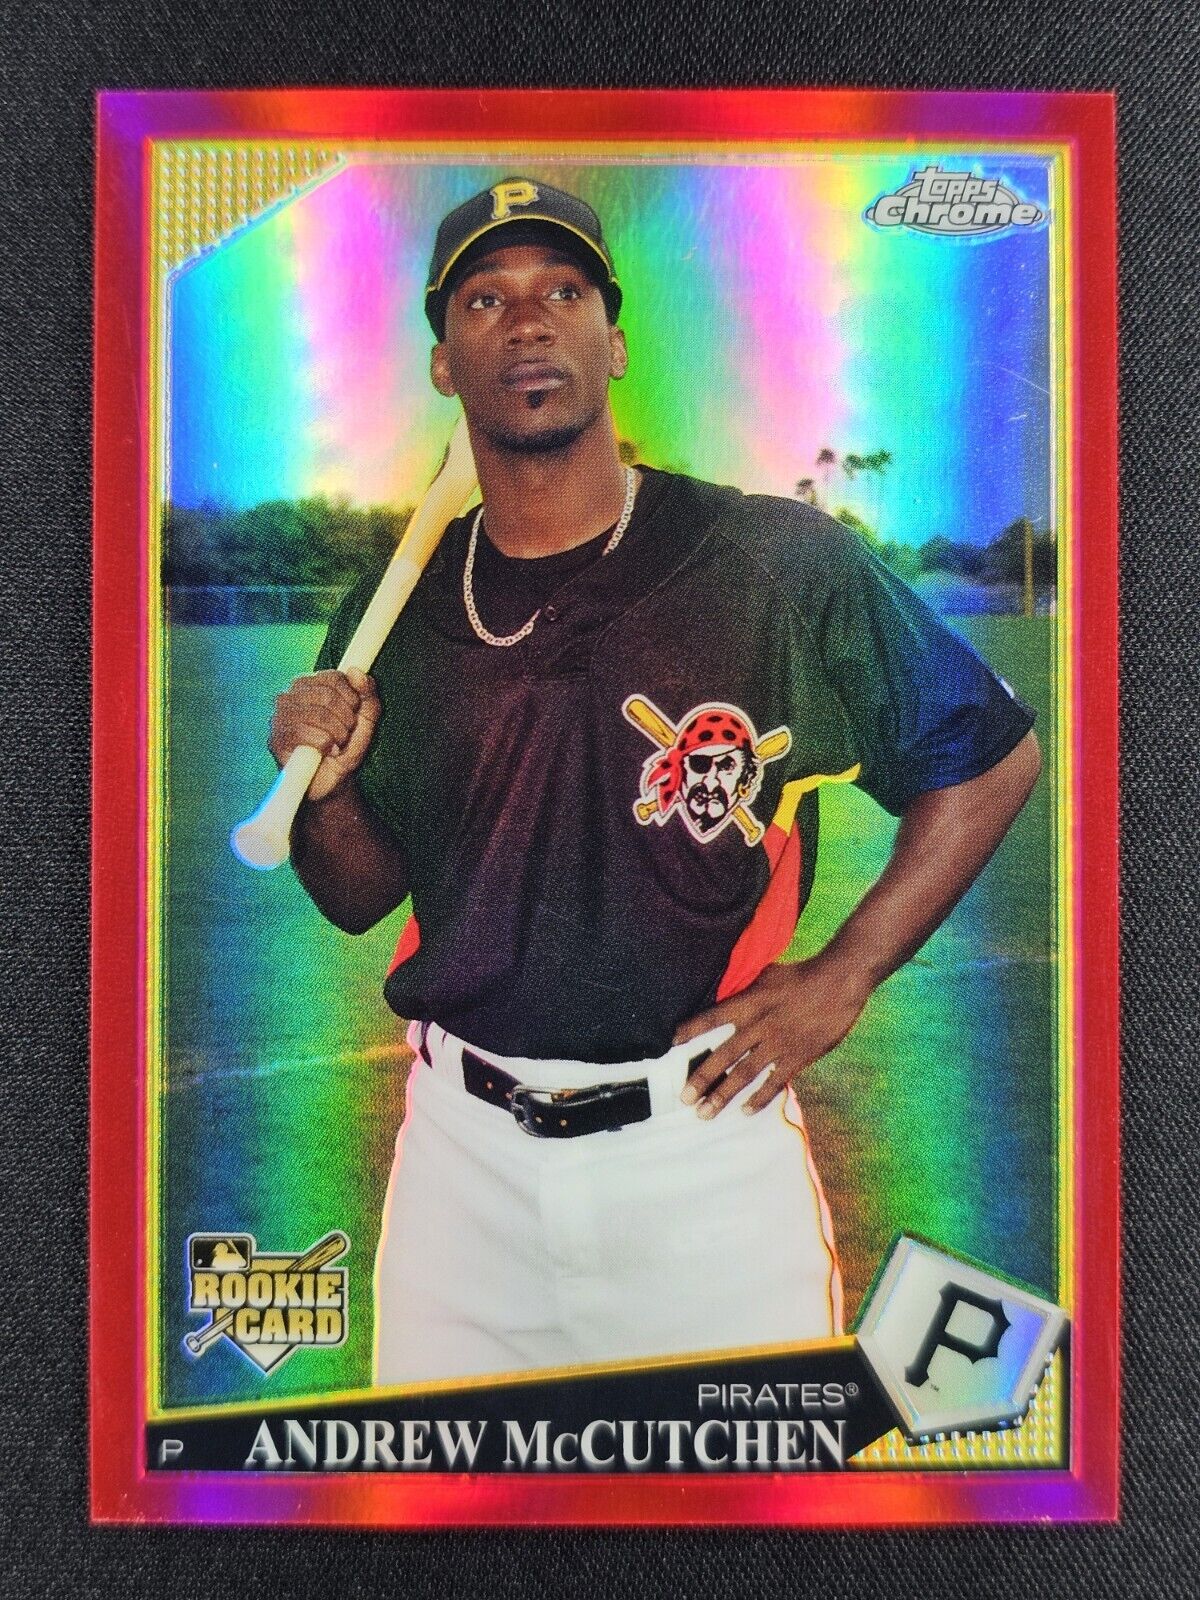 Andrew McCutchen 2009 Topps Chrome Red Refractor 04/25 RC ROOKIE #213 PIRATES